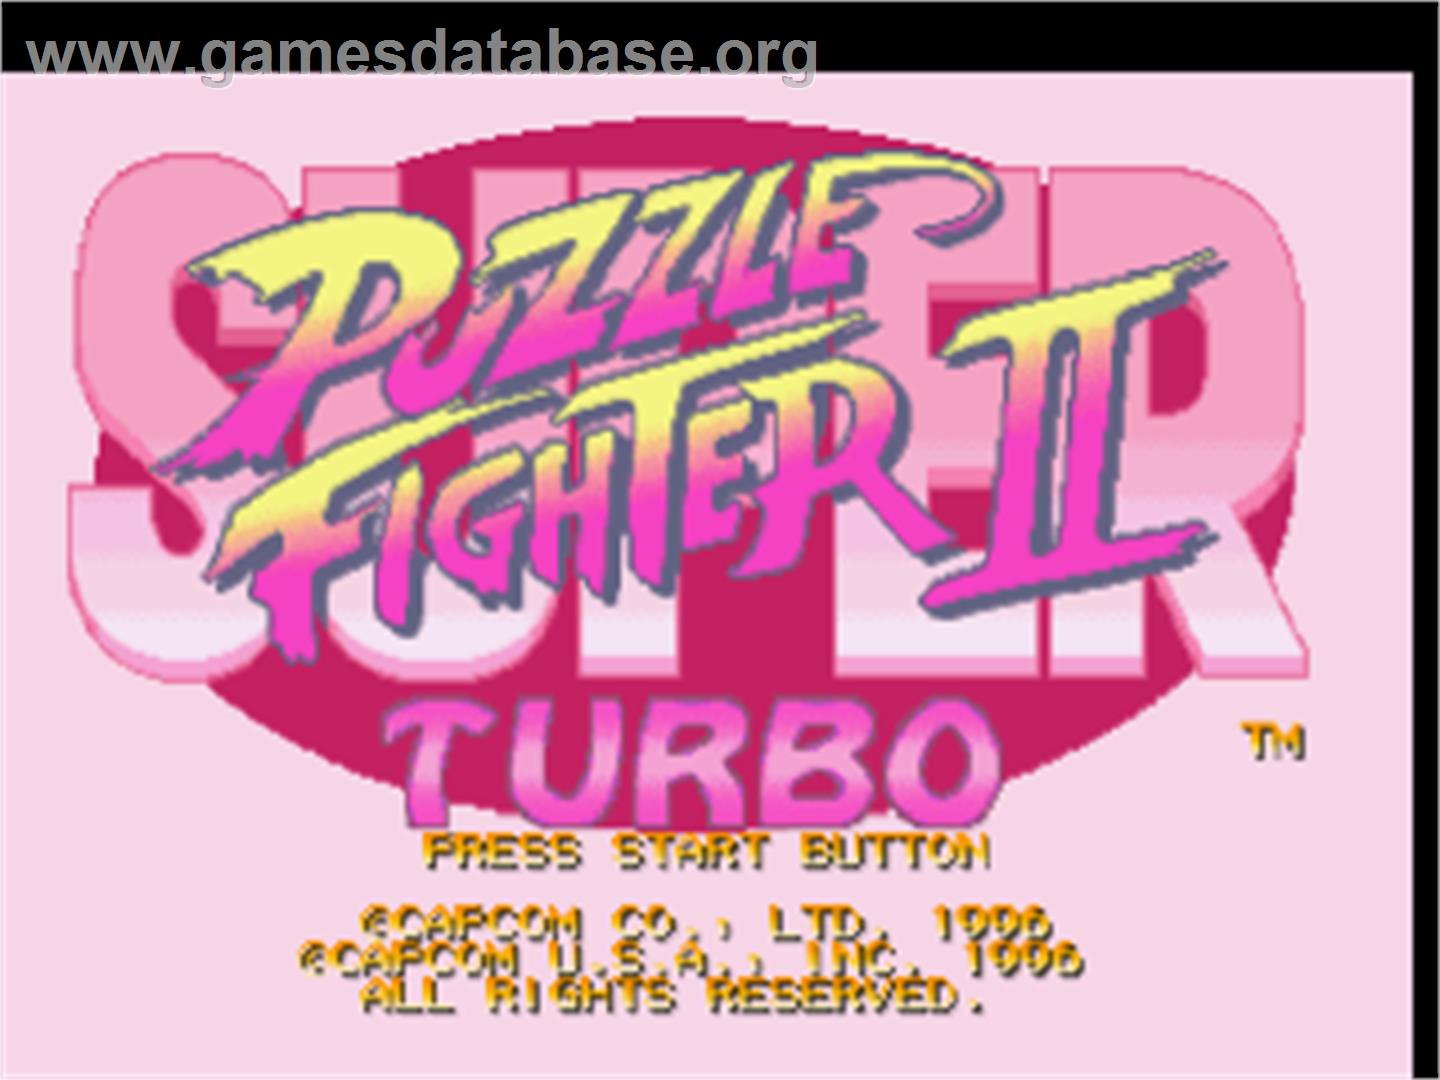 Super Puzzle Fighter II Turbo - Sony Playstation - Artwork - Title Screen